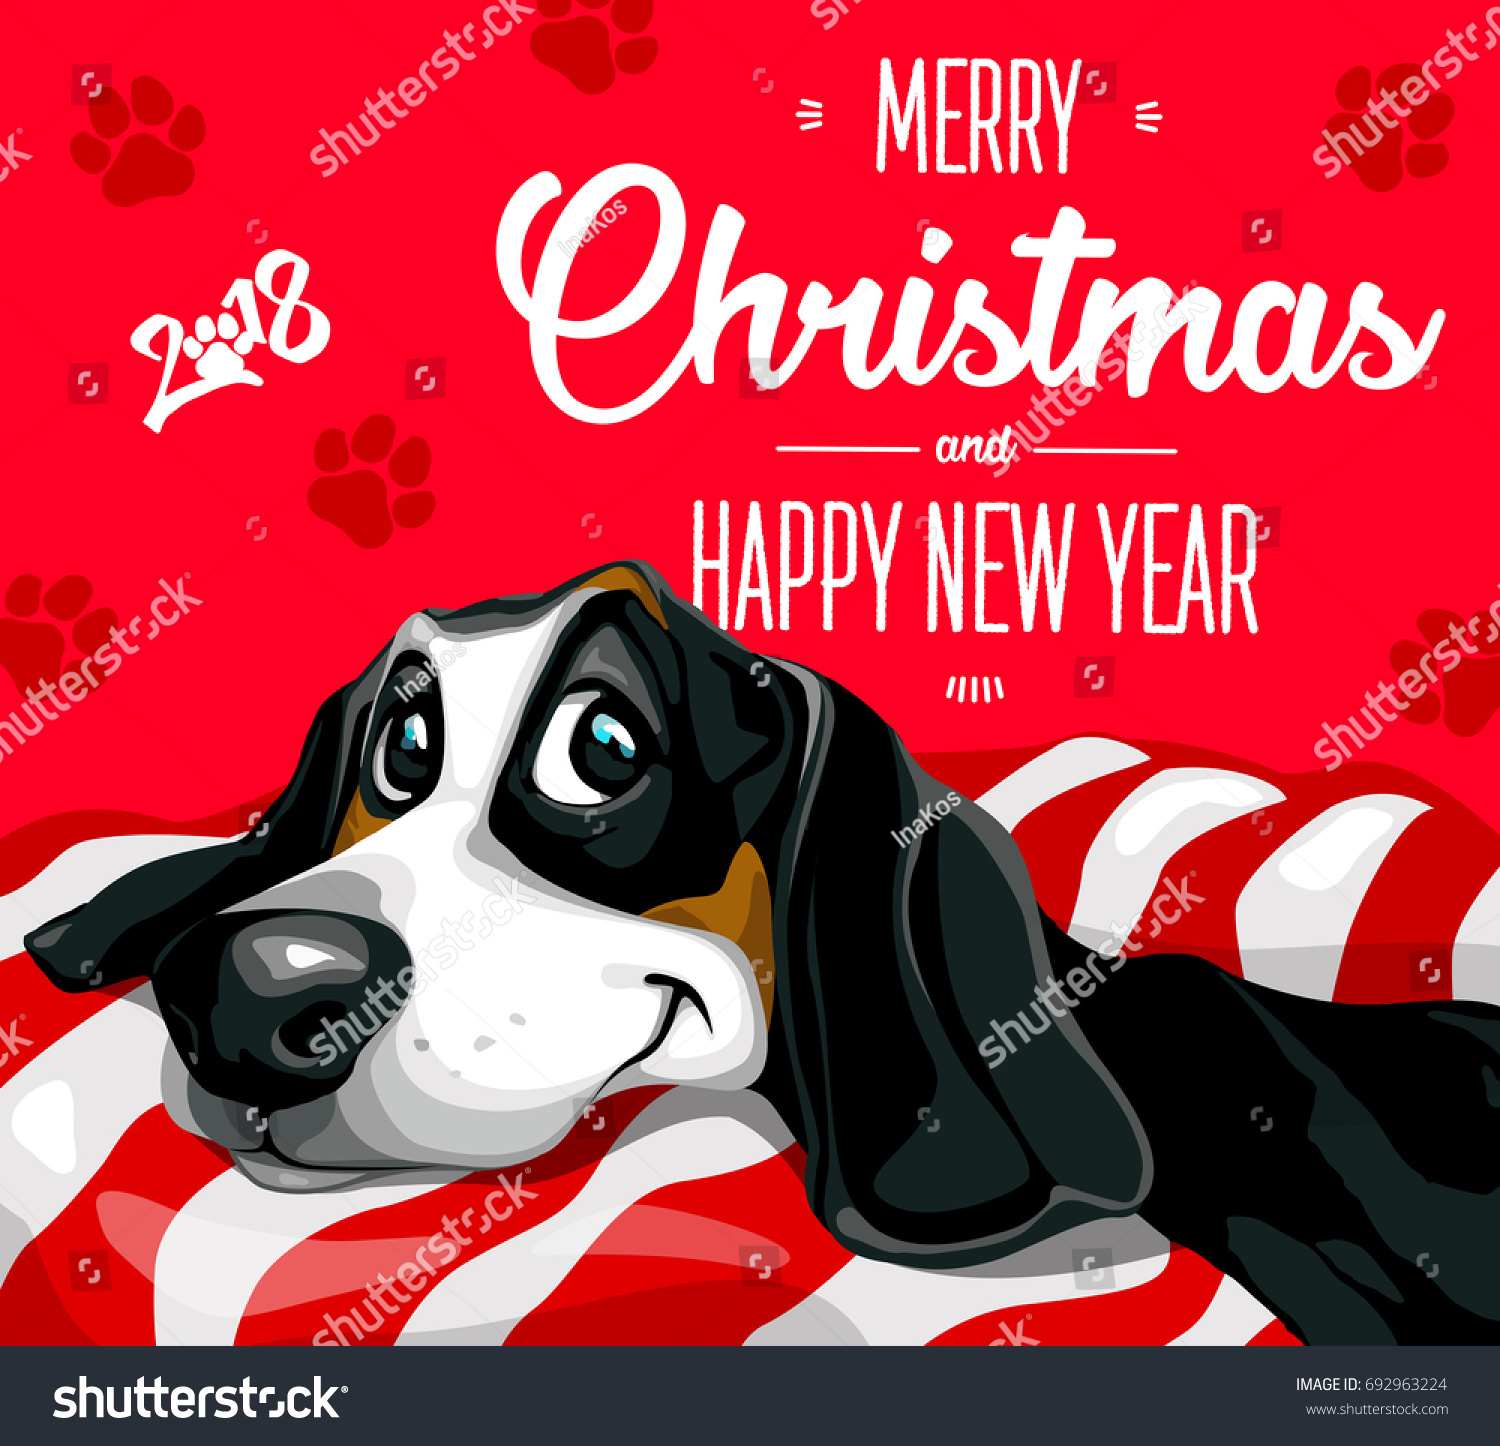 Merry Christmas and a Happy New Year 2018 Happy funny puppy